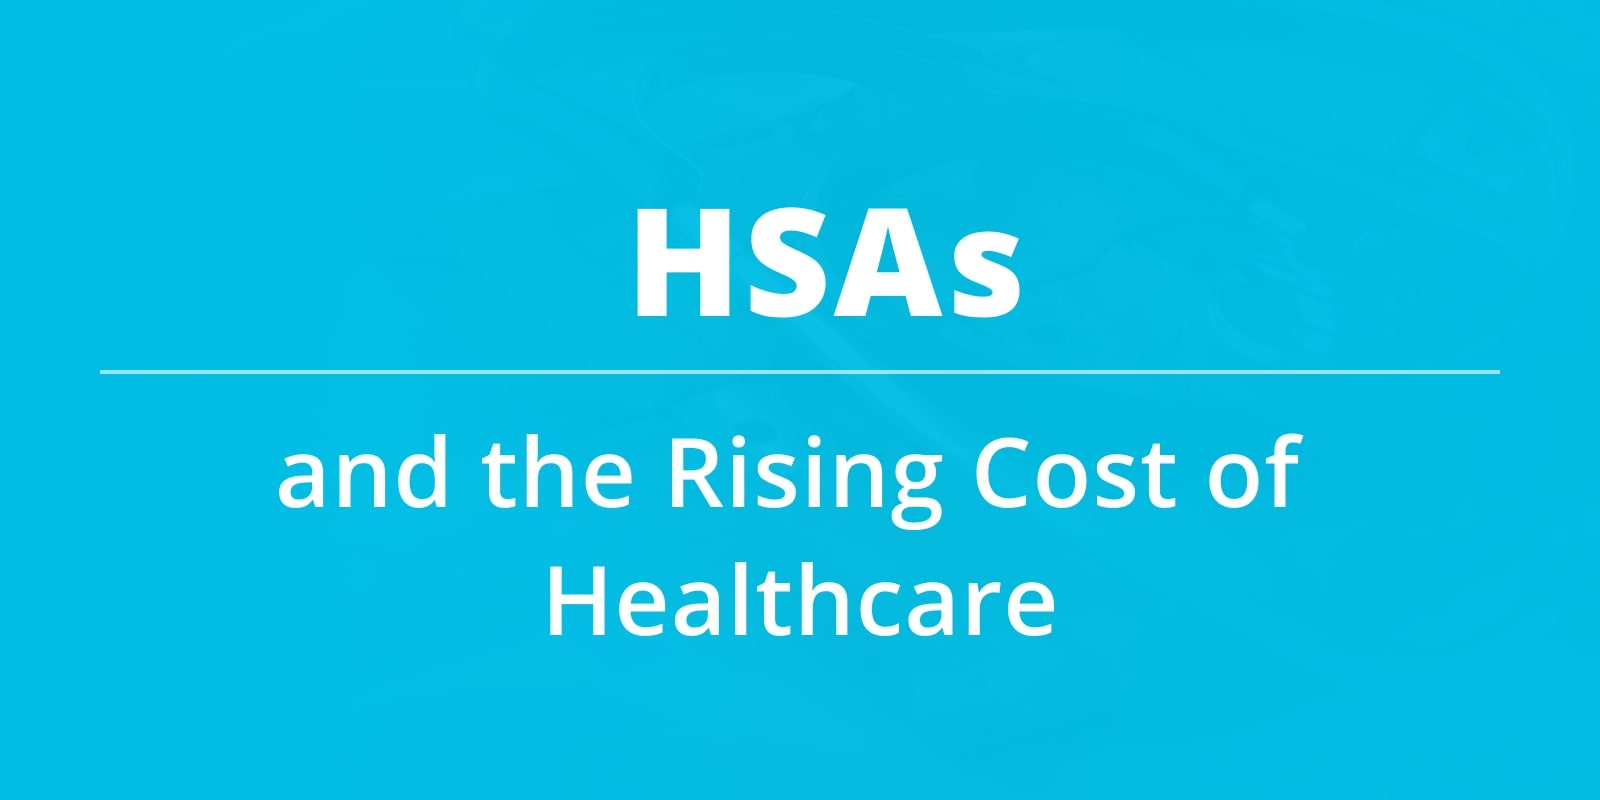 HSAs and the Rising Cost of Healthcare